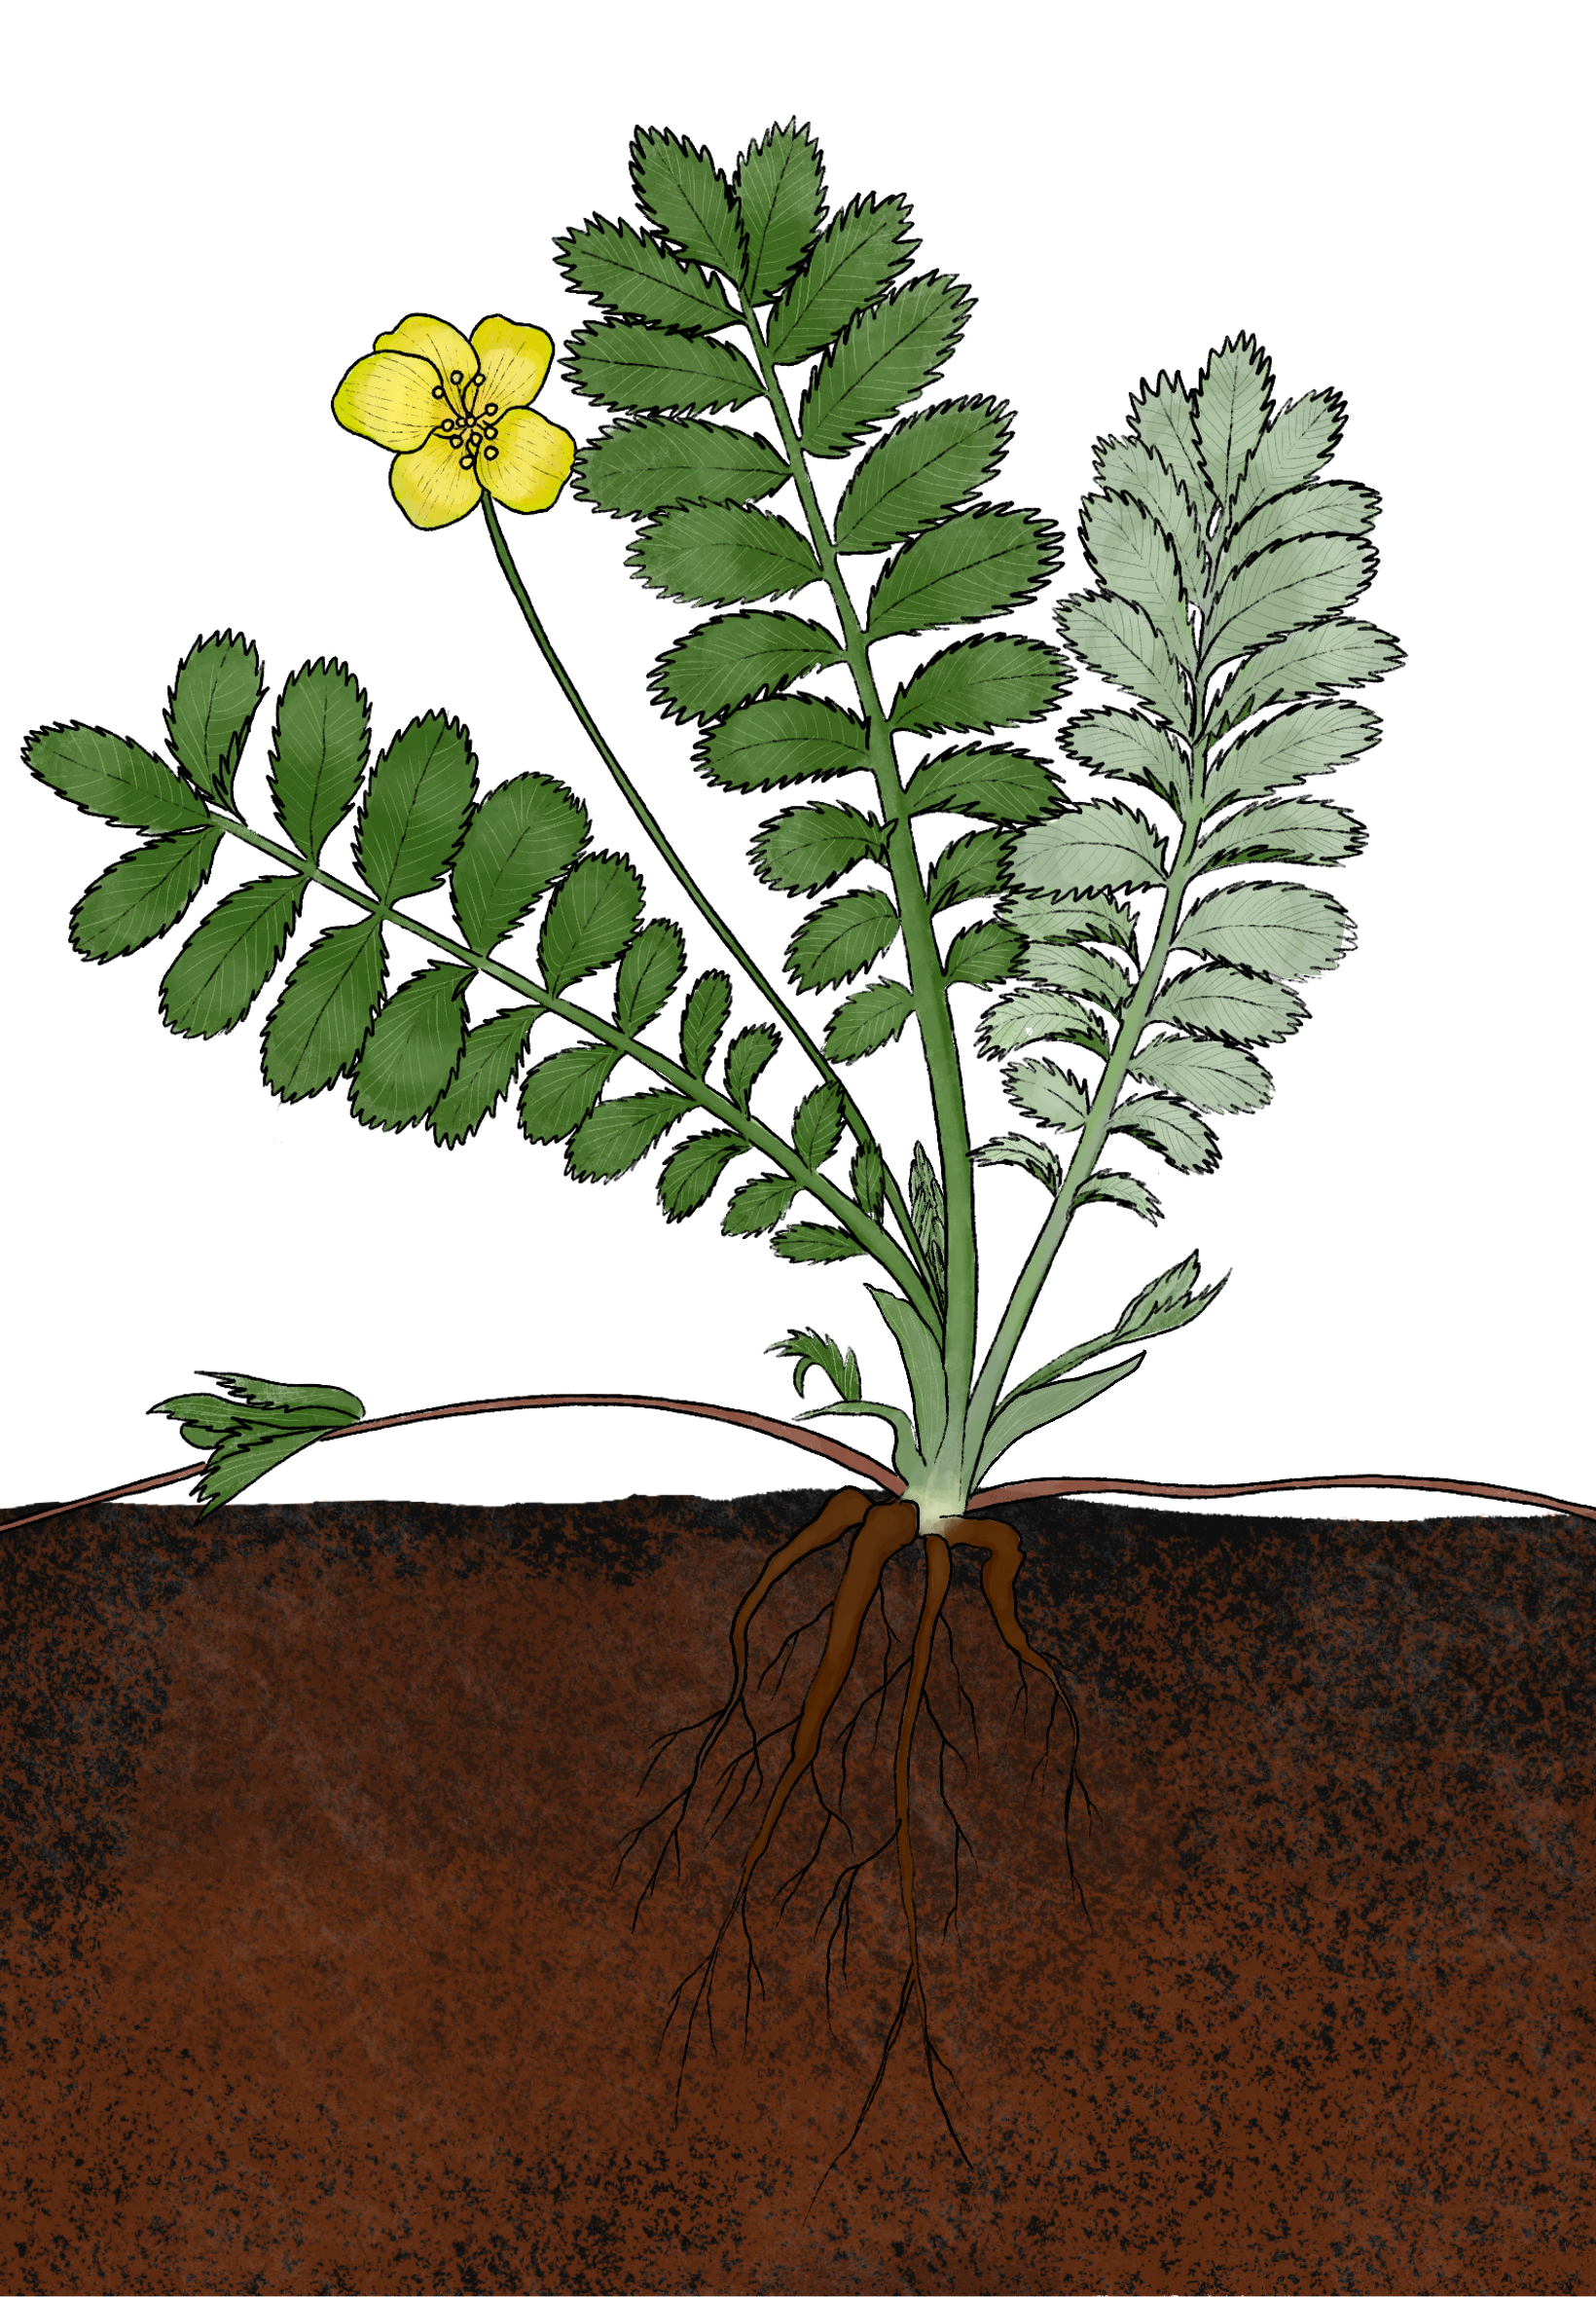 Pacific silverweed - Illustrated by Lilly Crosby